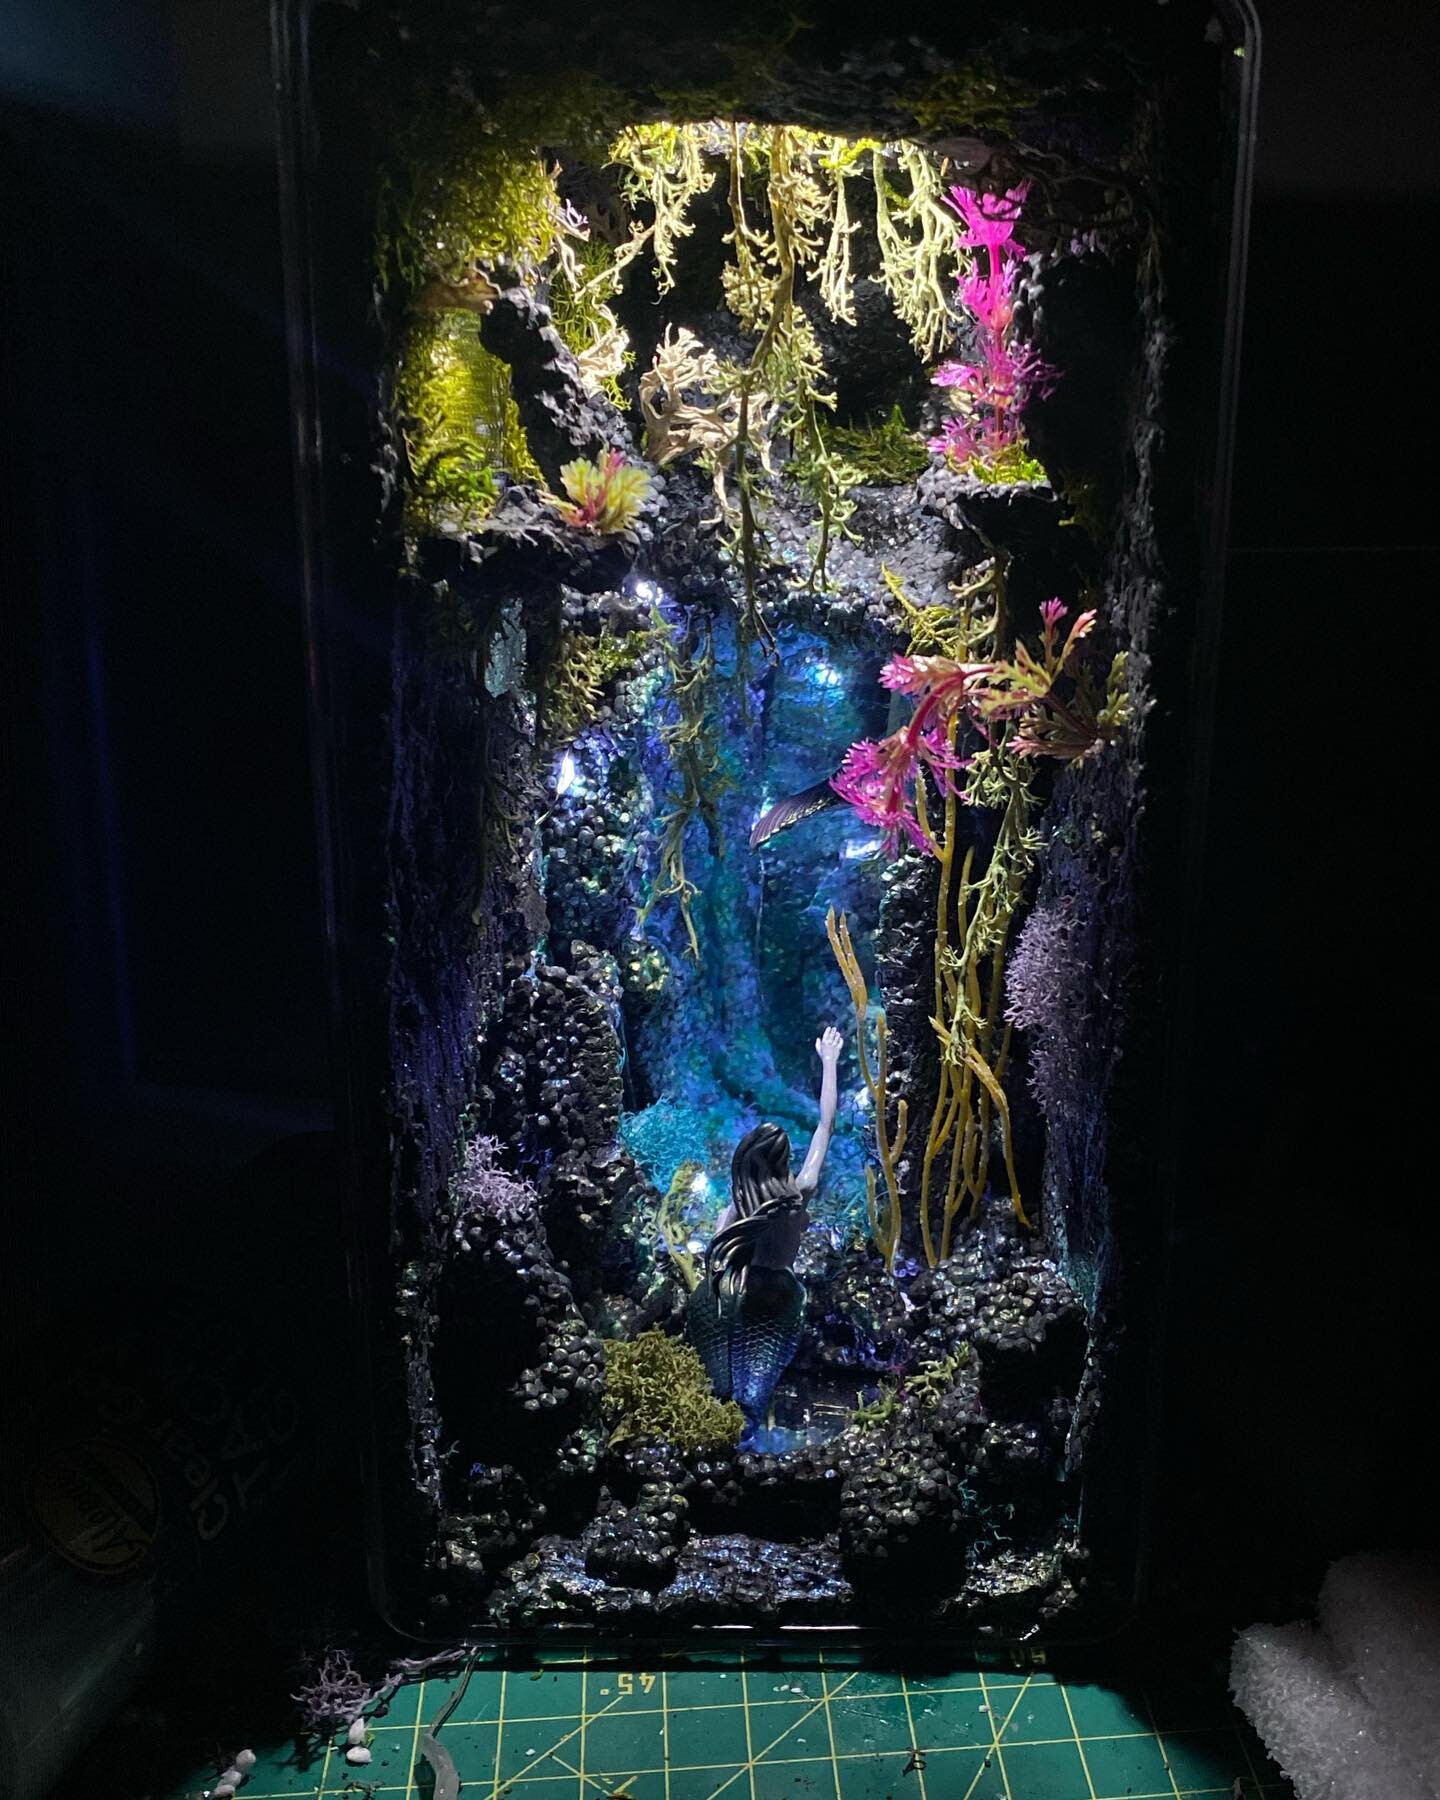 WORK IN PROGRESS&hellip;.Mermaid grotto book nook 🧜&zwj;♀️ BEFORE the dreaded resin pour&hellip;⚠️

&hellip;8 pours later and only halfway there 😭 plus my apartment smells like nuclear waste. Fun facts: there are FIVE mirrors at play in this book n